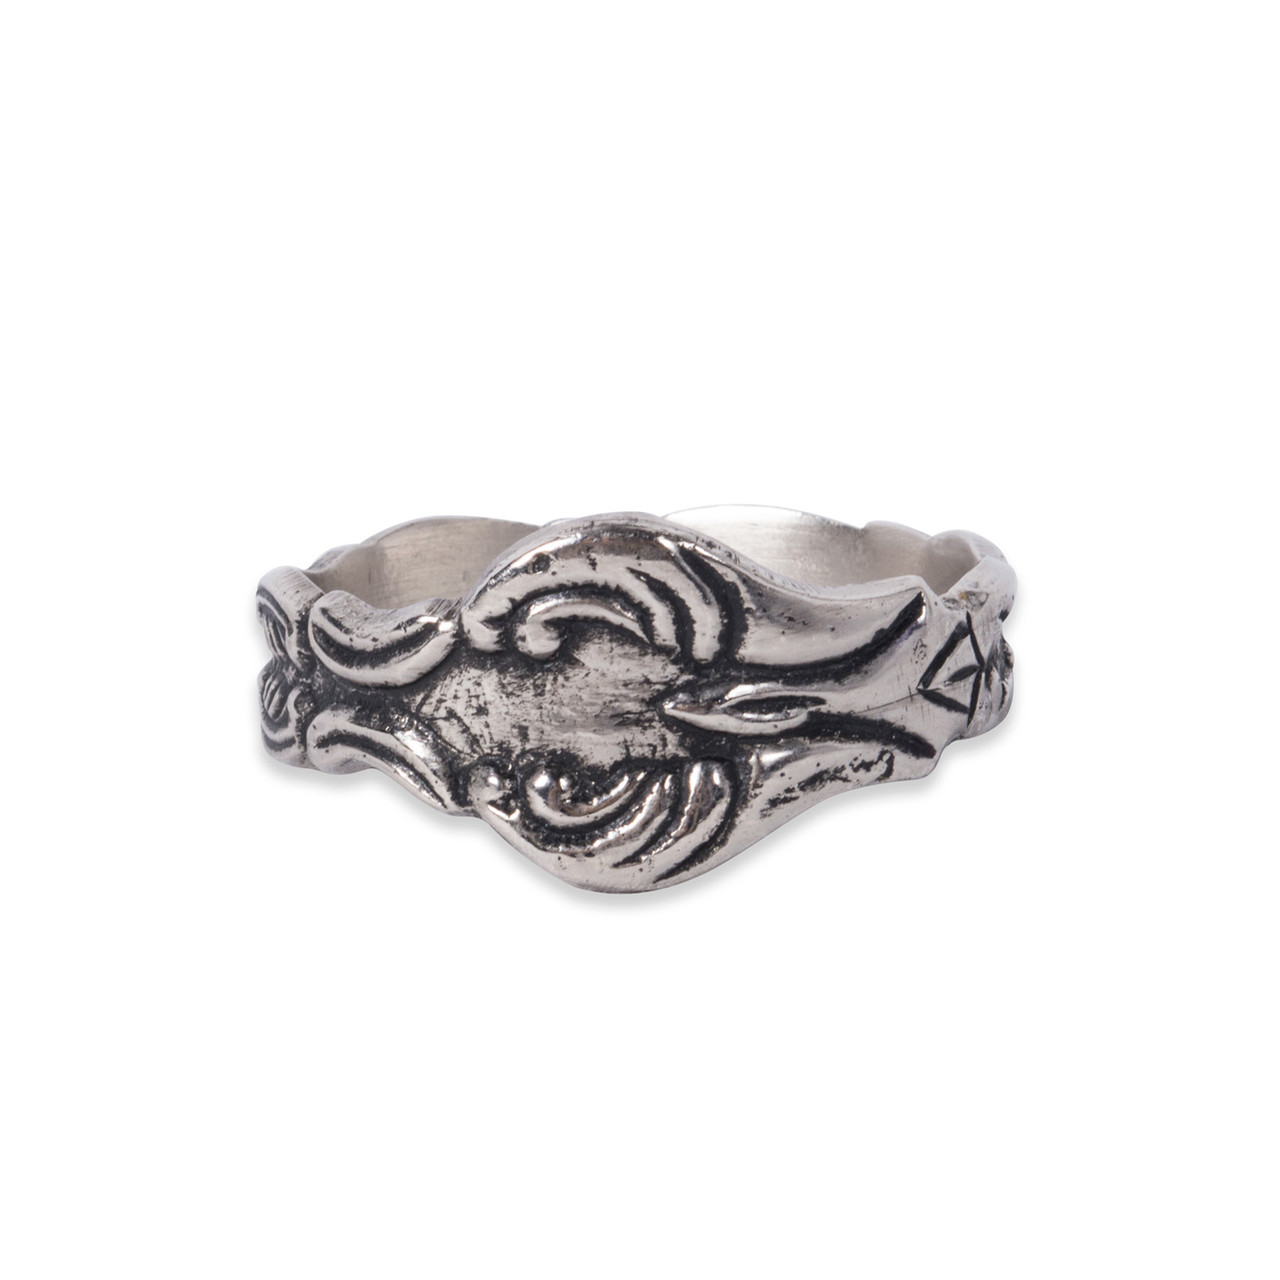 Set of 4 Silver Finish Scroll Embossed Napkin Rings 2.5